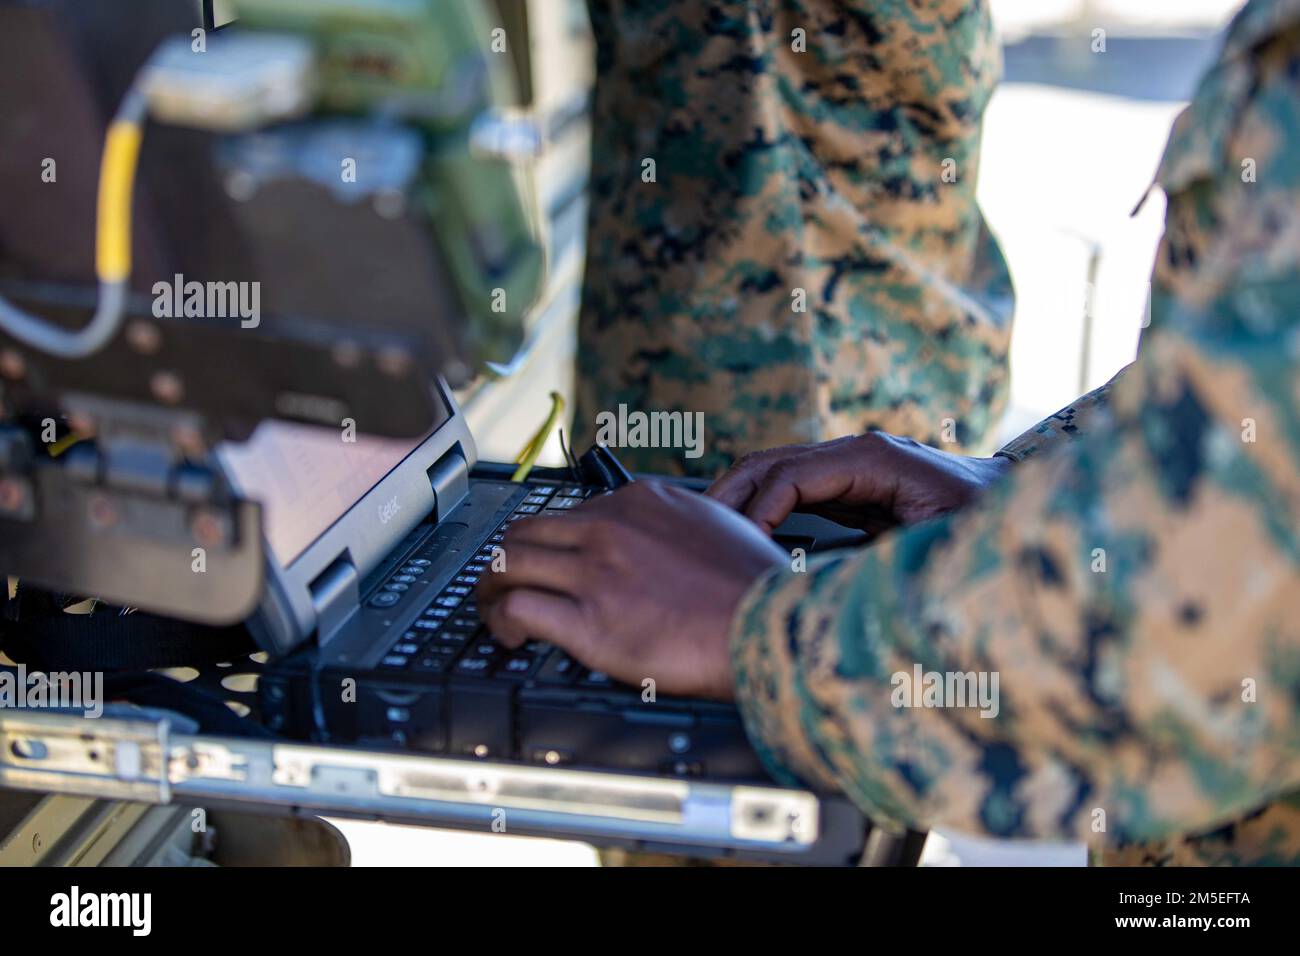 U.S. Marine Corps Cpl. Ahmed Spence, a satellite communications operator with 9th Communication Battalion, I Marine Expeditionary Force Information Group, sets up connection on the Very Small Aperture Terminal at Marine Corps Base Camp Pendleton, California, March 11, 2022. This training allows the 9th Communication Battalion to be capable of operating, defending, and preserving information networks to enable command and control for the commander in all domains, and support and conduct Marine Air Ground Task Force operations in the information environment. Stock Photo